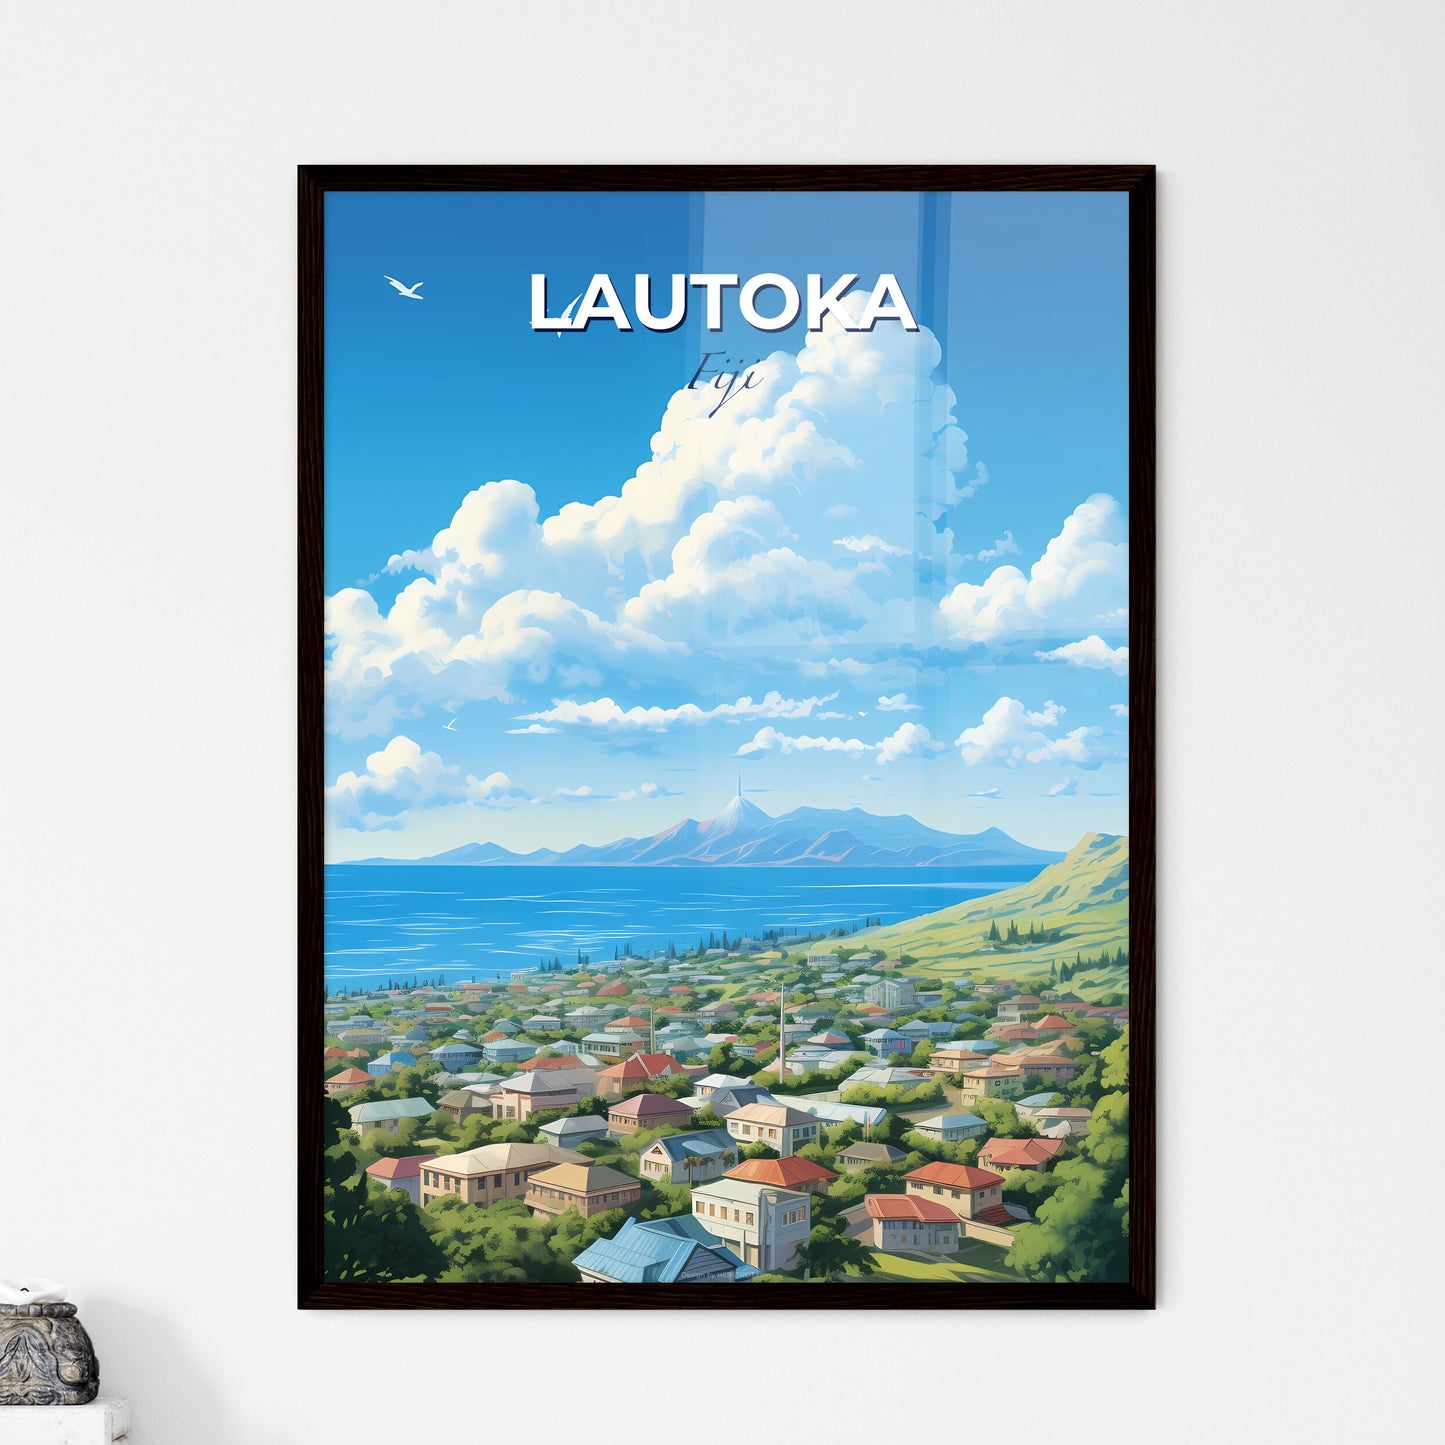 Lautoka Fiji Skyline - A Landscape Of A Town By The Water - Customizable Travel Gift Default Title